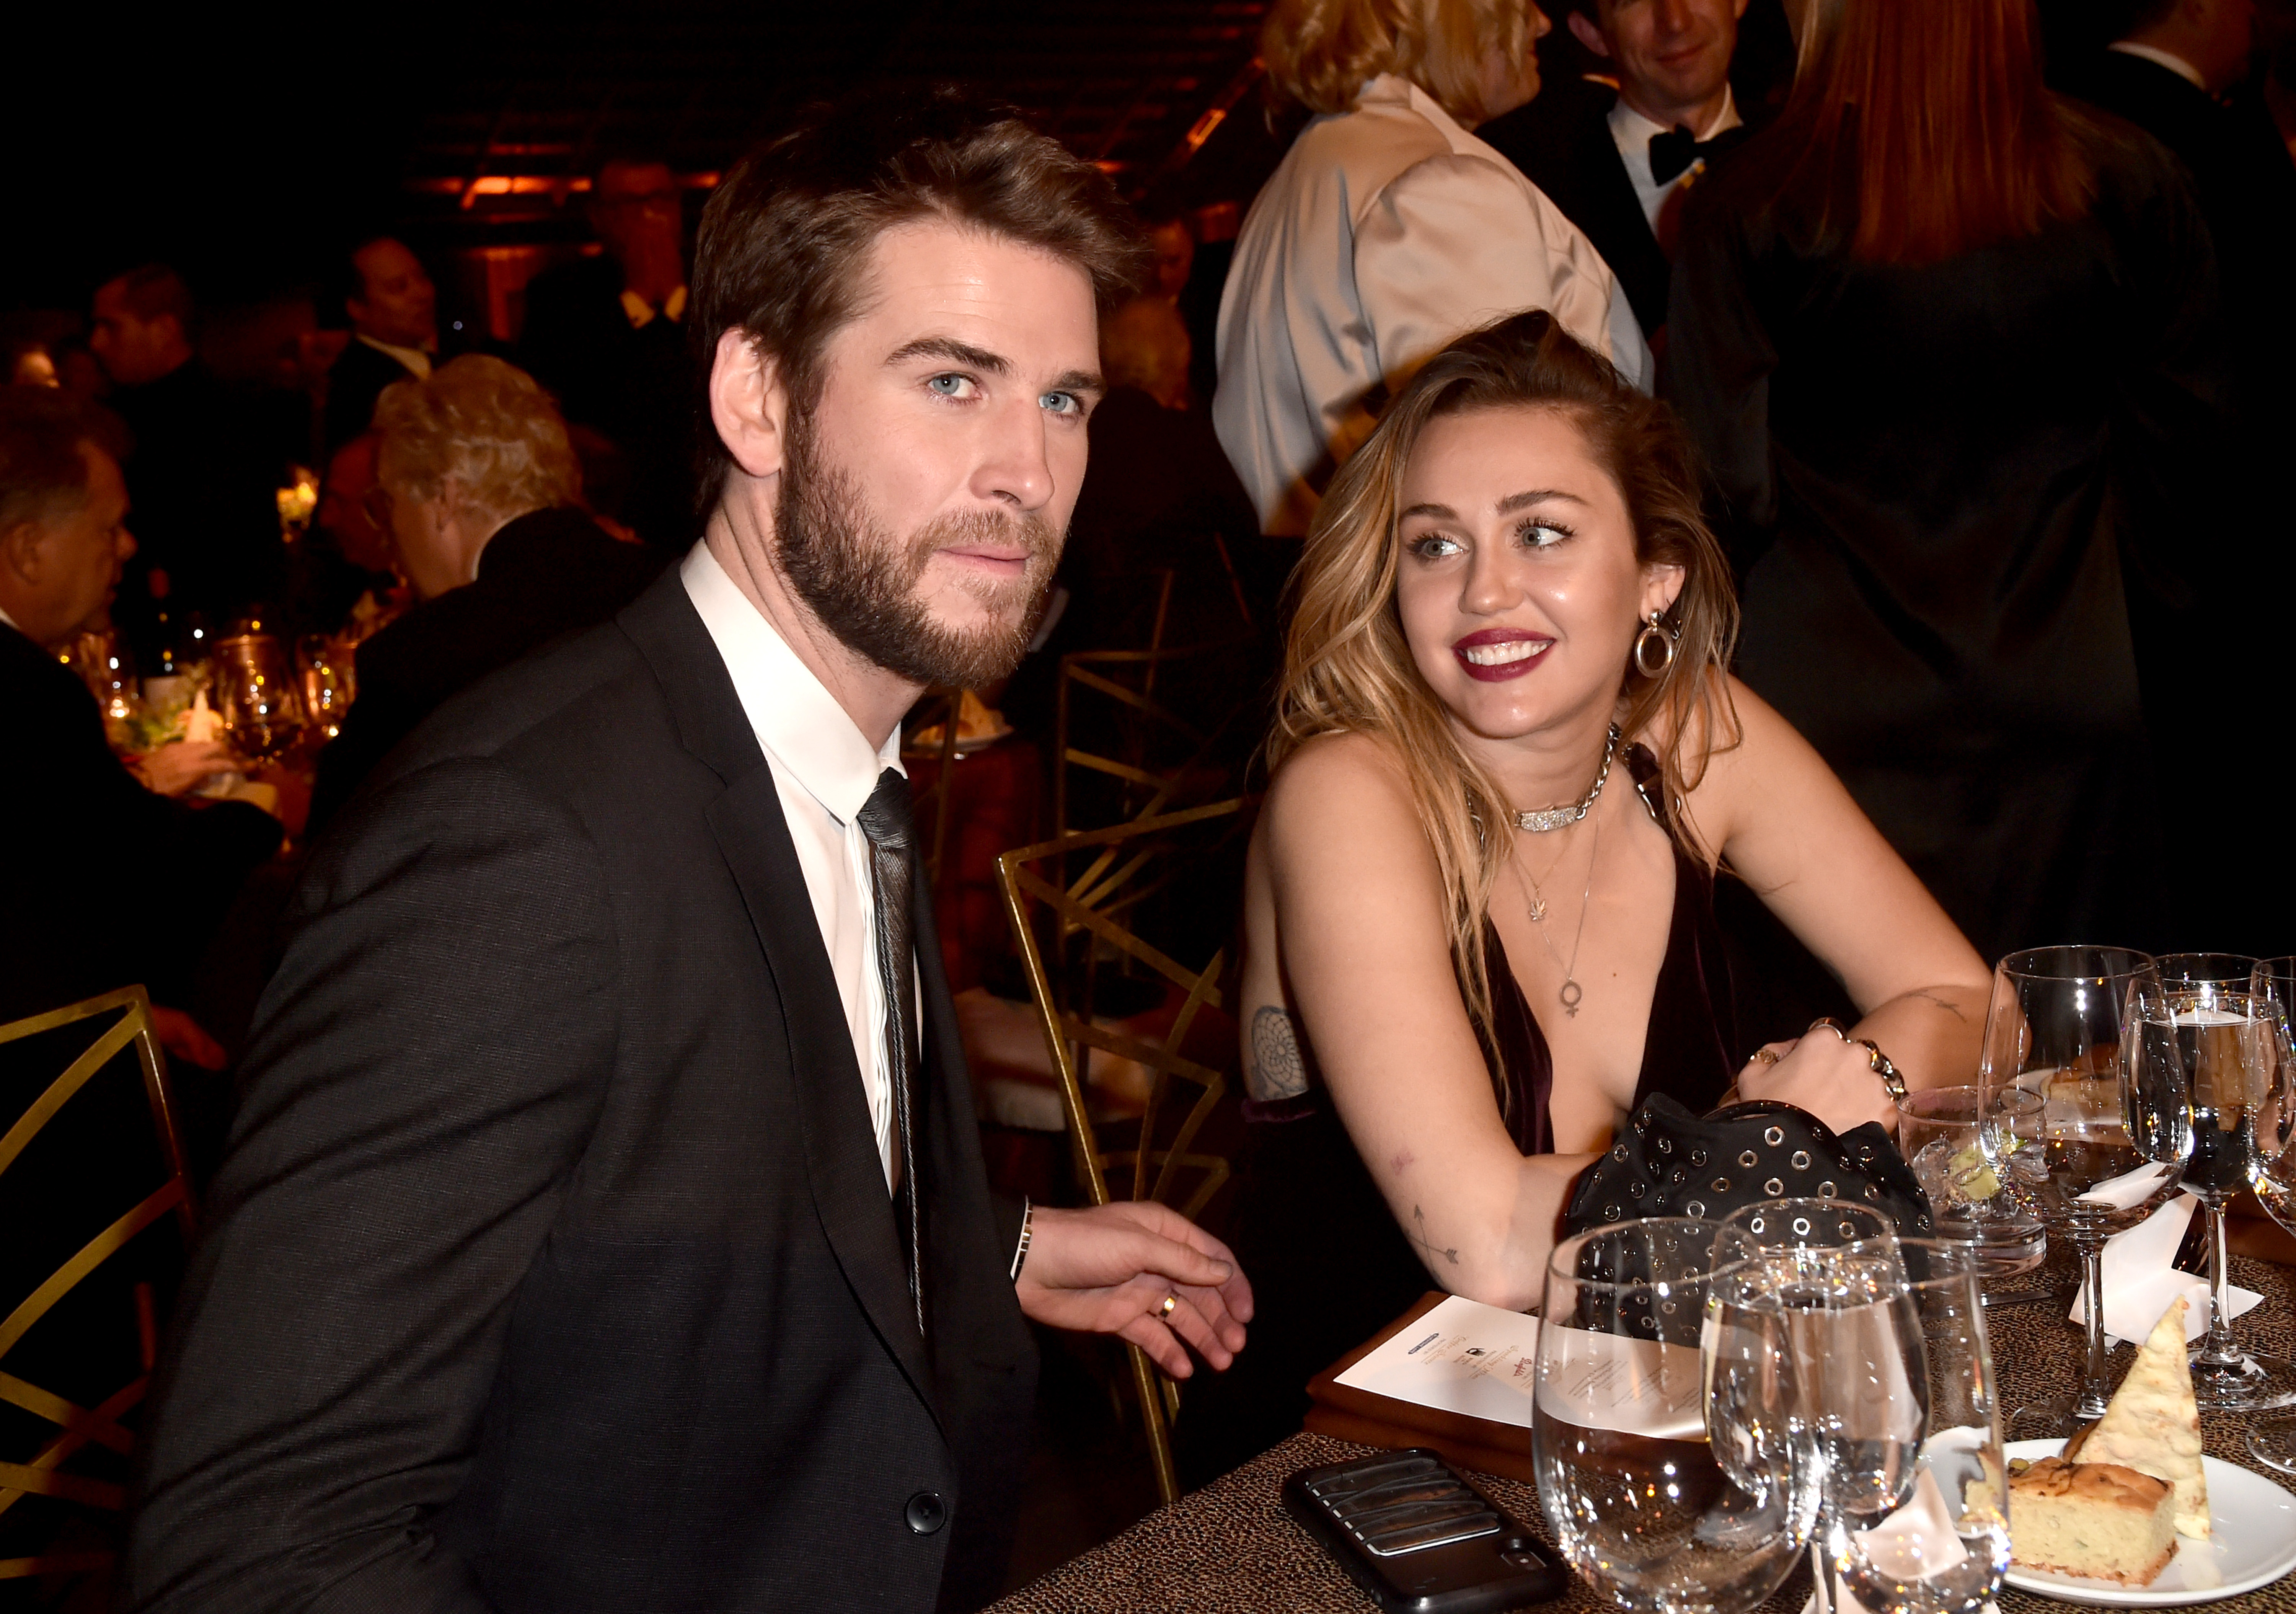 angelica tedesco recommends liam hemsworth naked pic